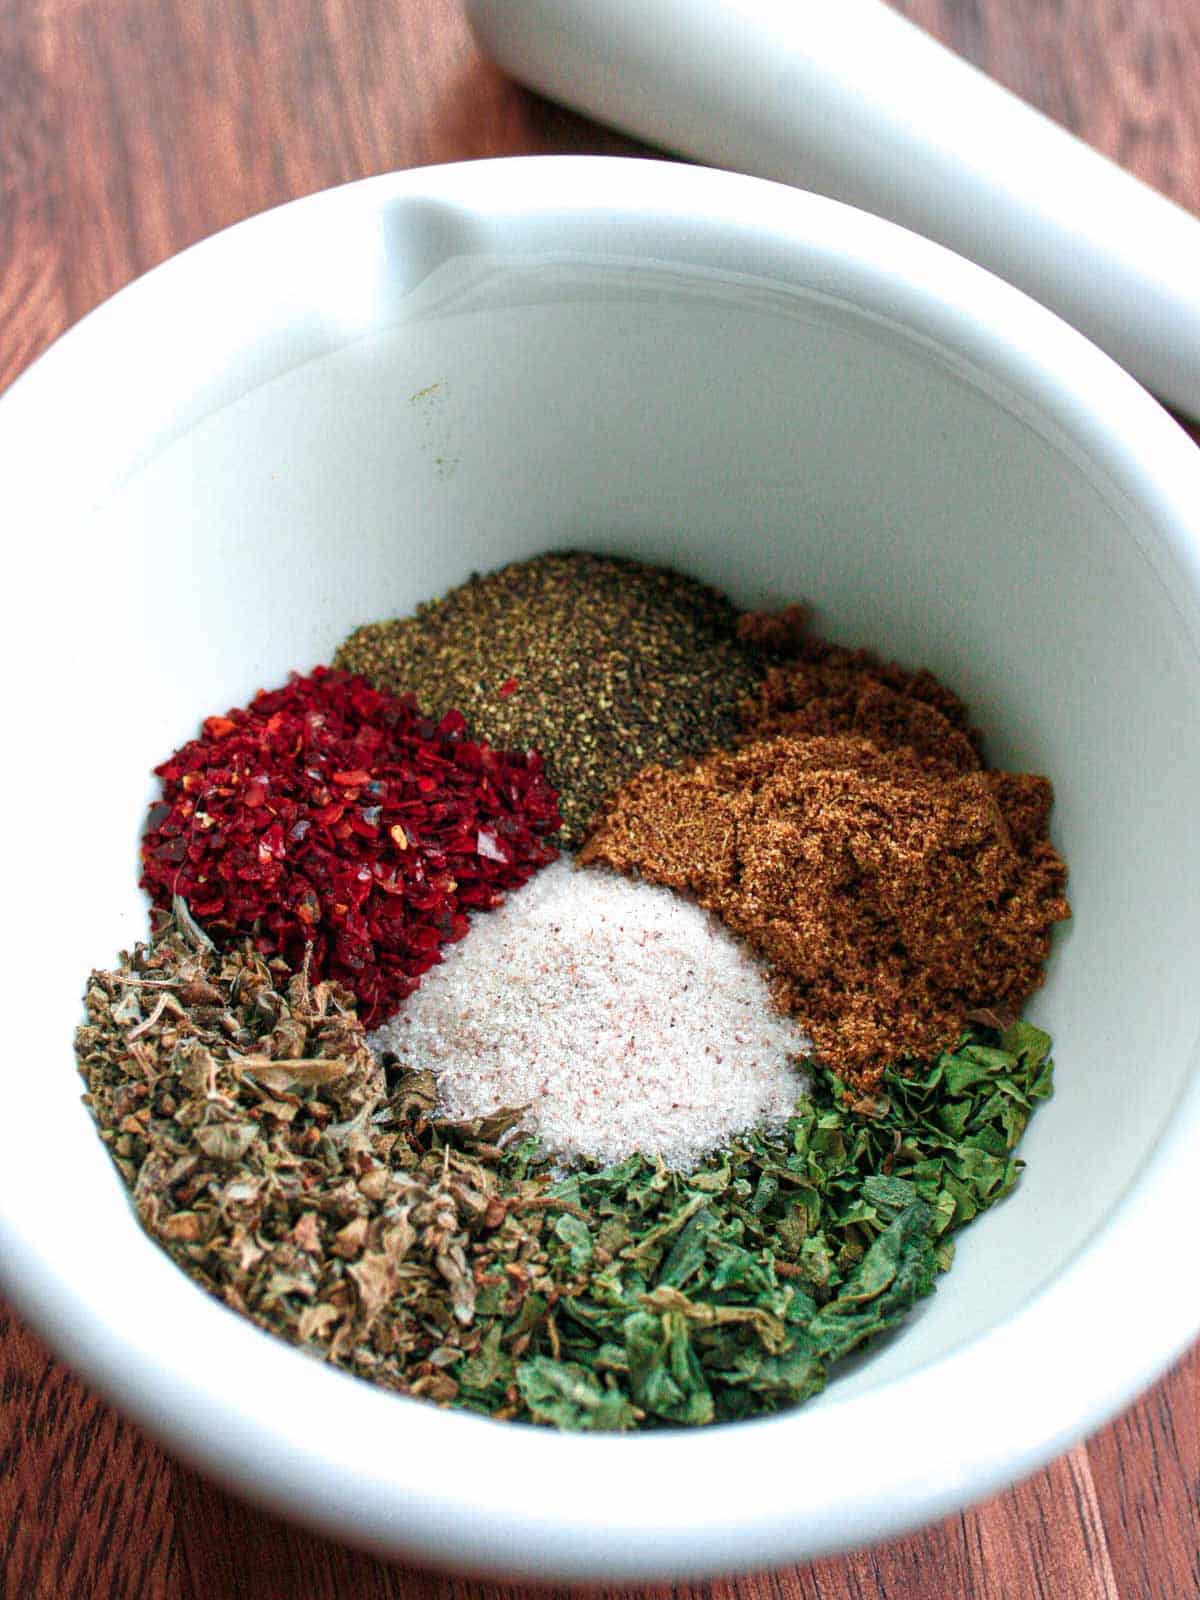 Colorful piles of rub spices in a white mortar and pestle.